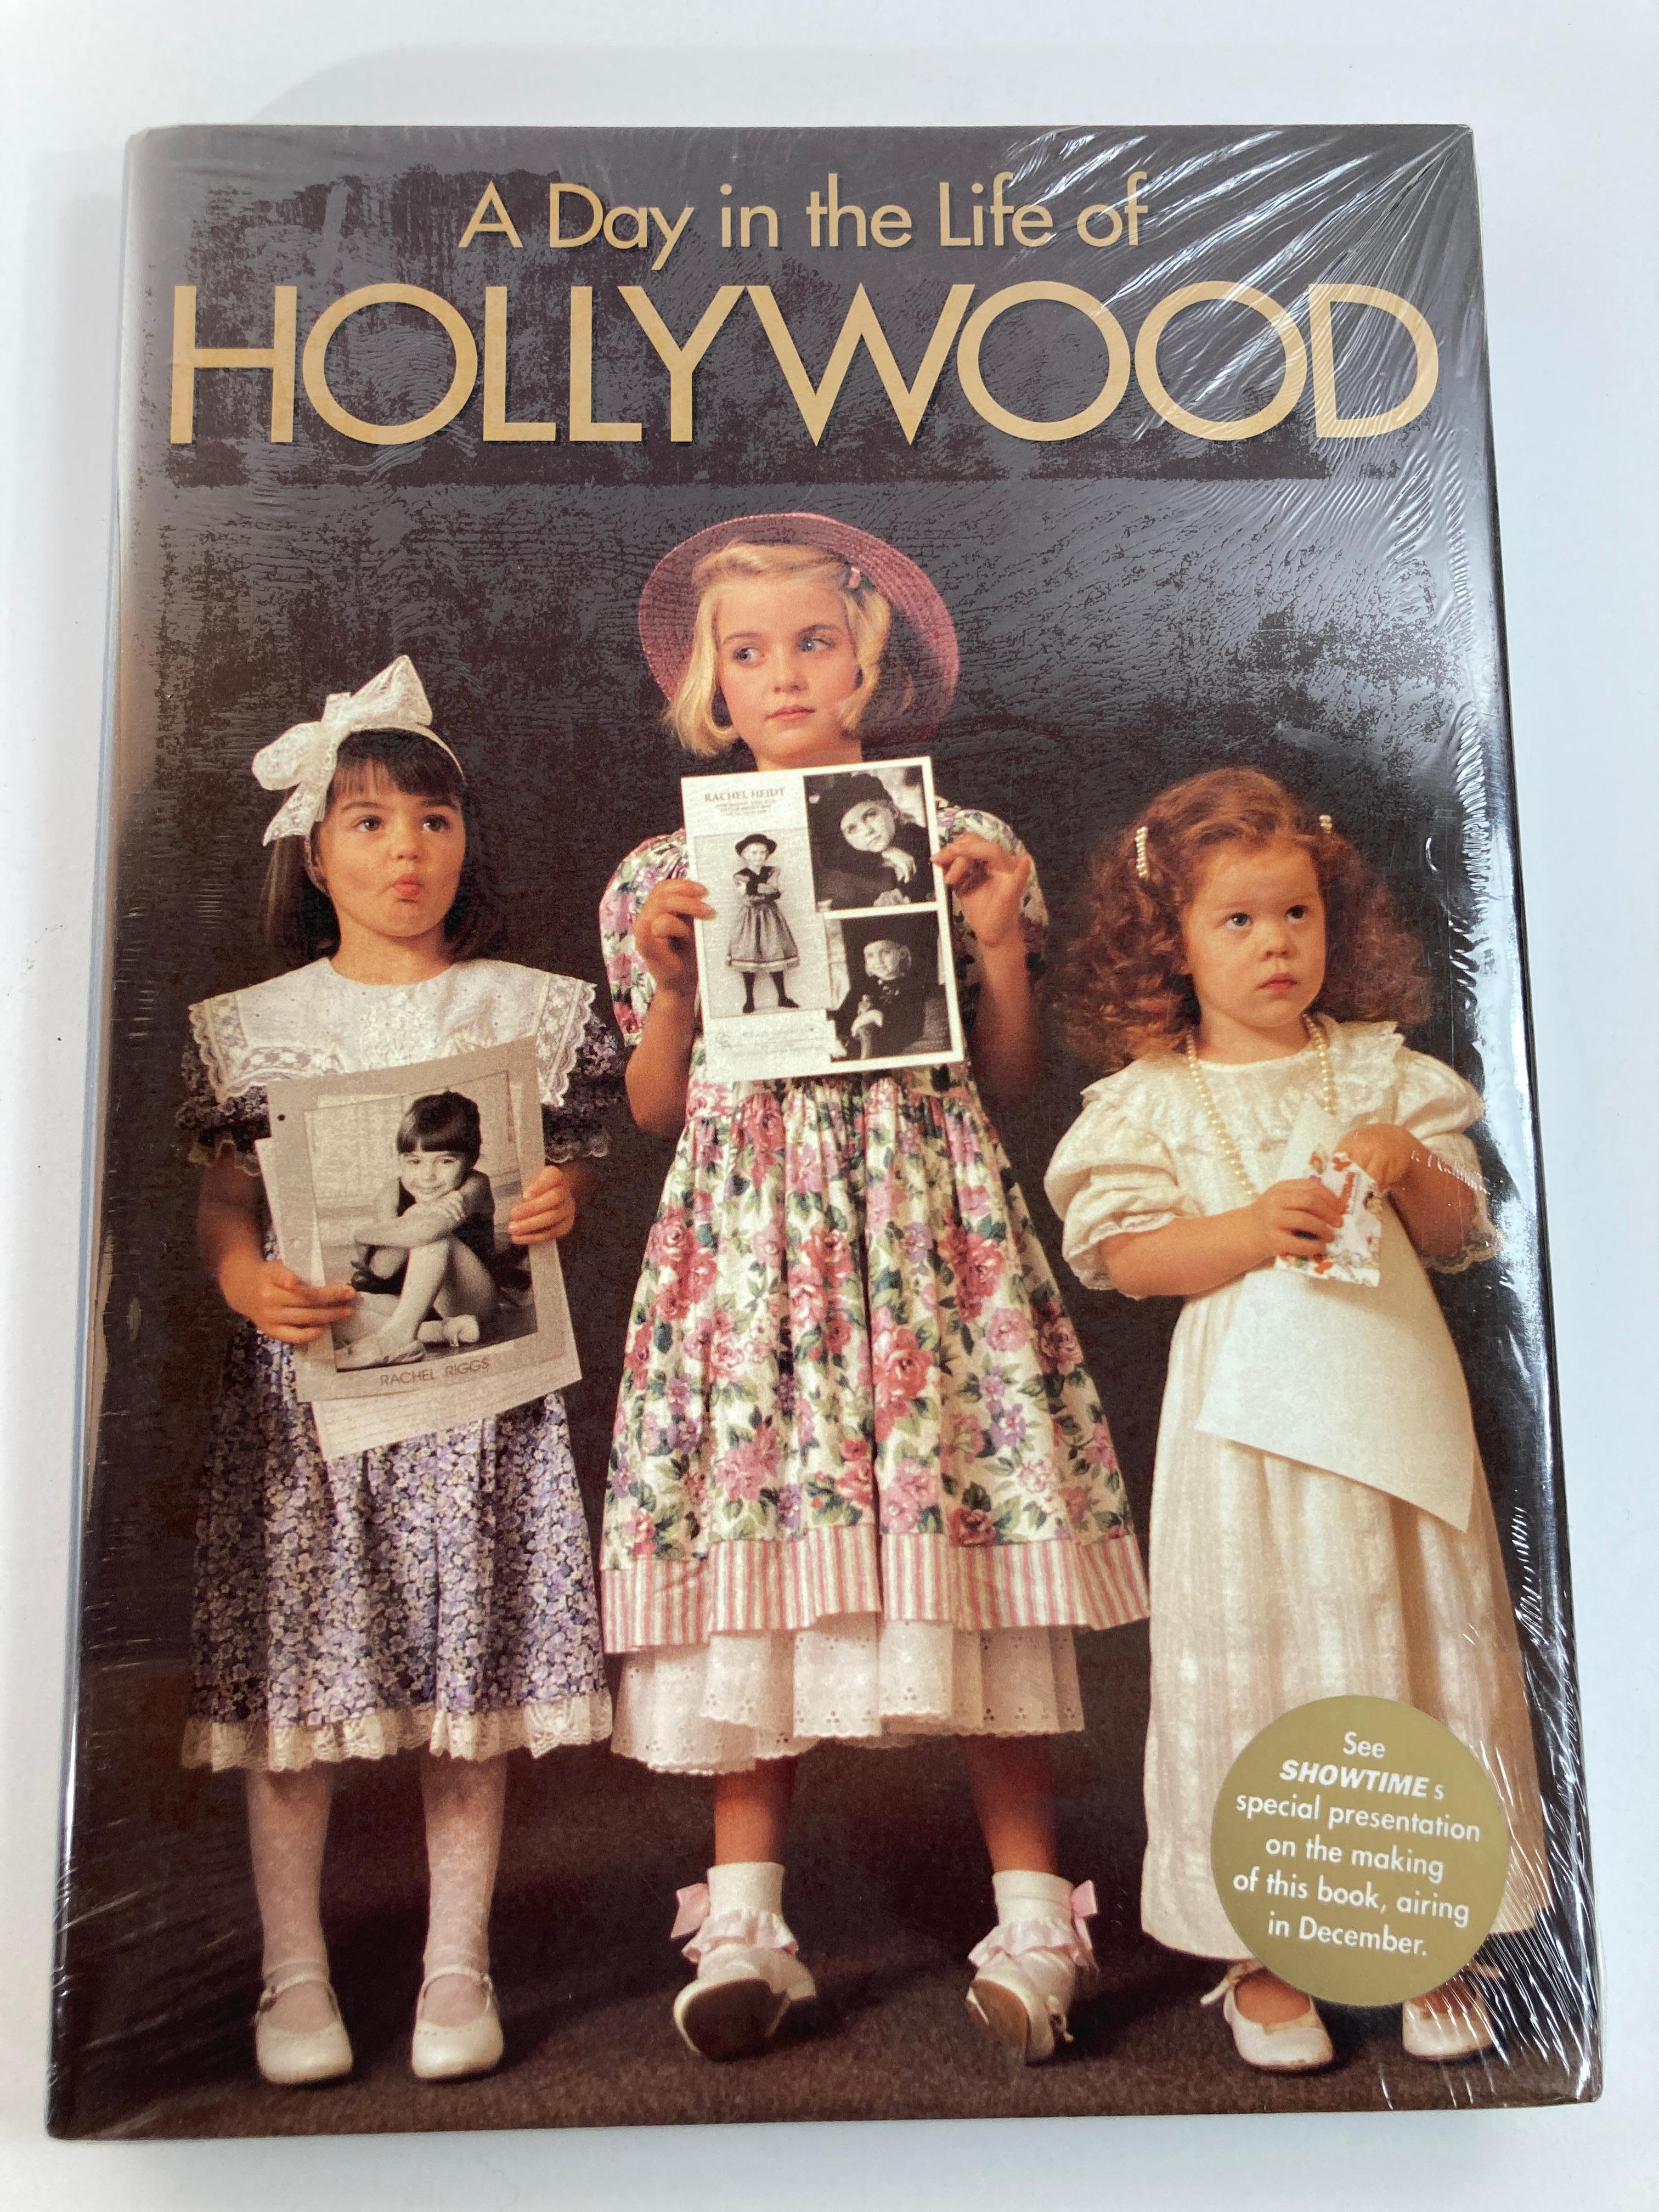 A Day in the Life of Hollywood: As Seen by 75 of the World's Leading Photographers on One Day, May 20, 1992,
New large hardcover book shrink wrapped.
On May 20, 1992, 75 leading photographers went behind the scenes in the film, television, and